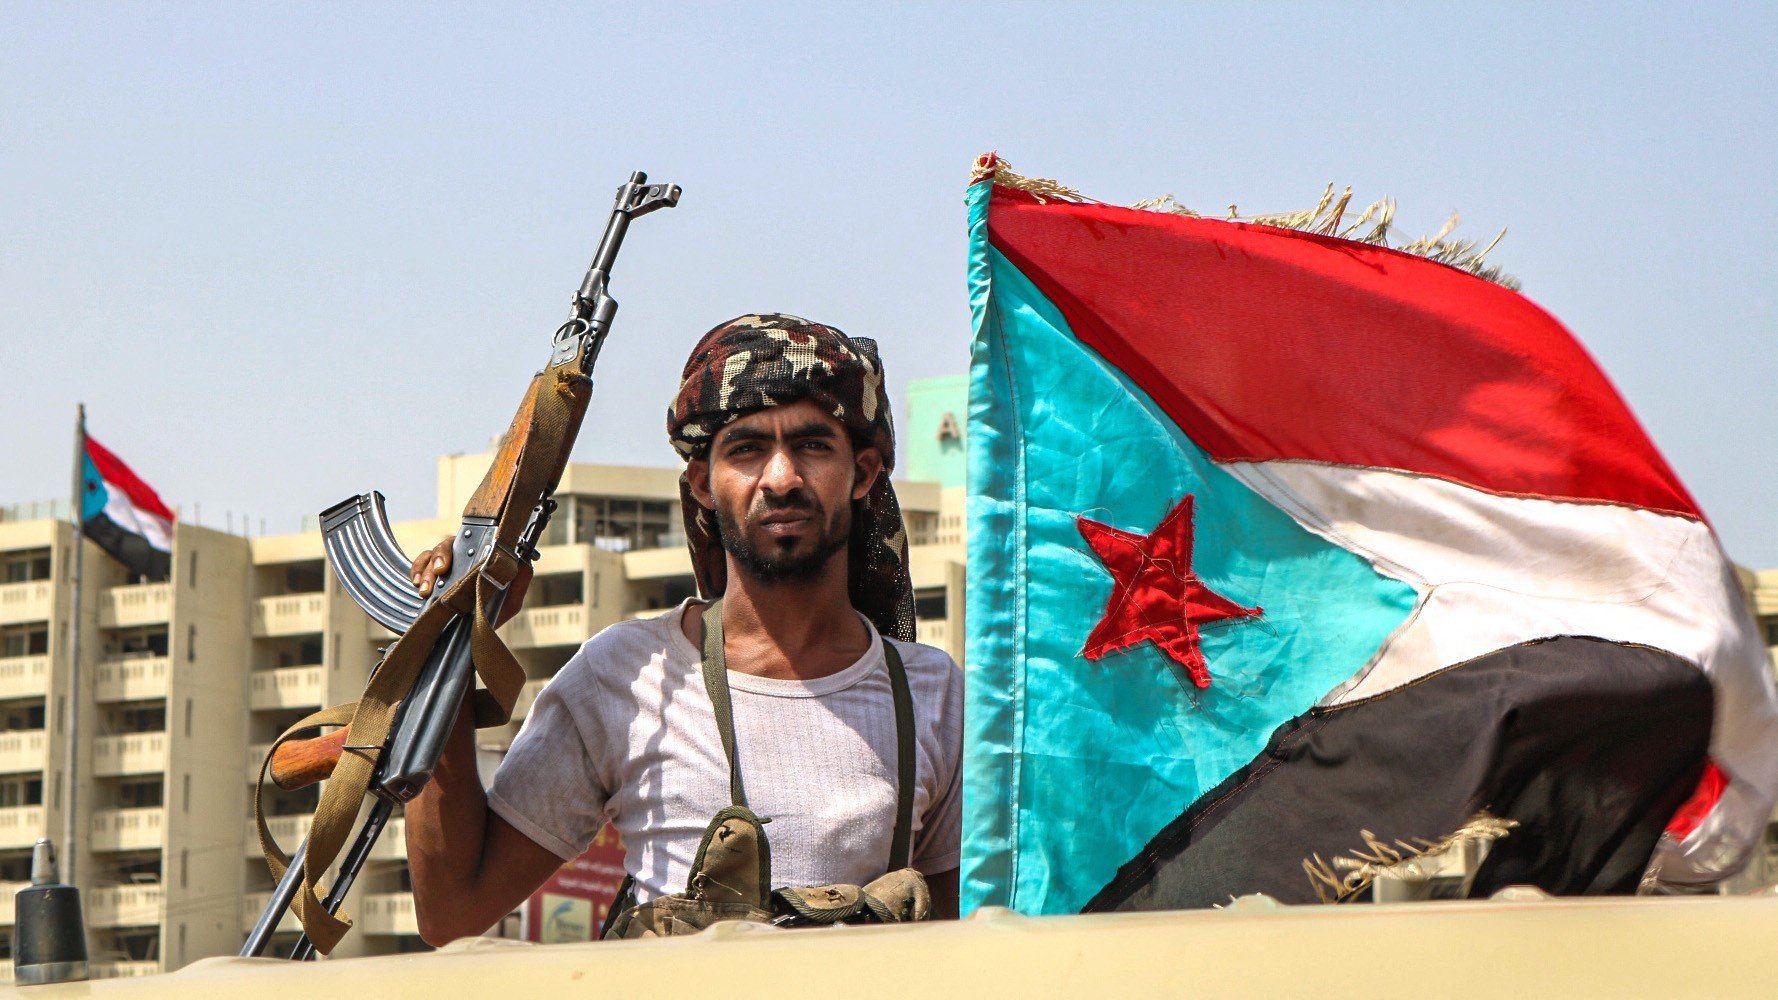 An STC fighter with the southern separatist flag (the old flag of South Yemen), in Aden in 2019 (AFP)